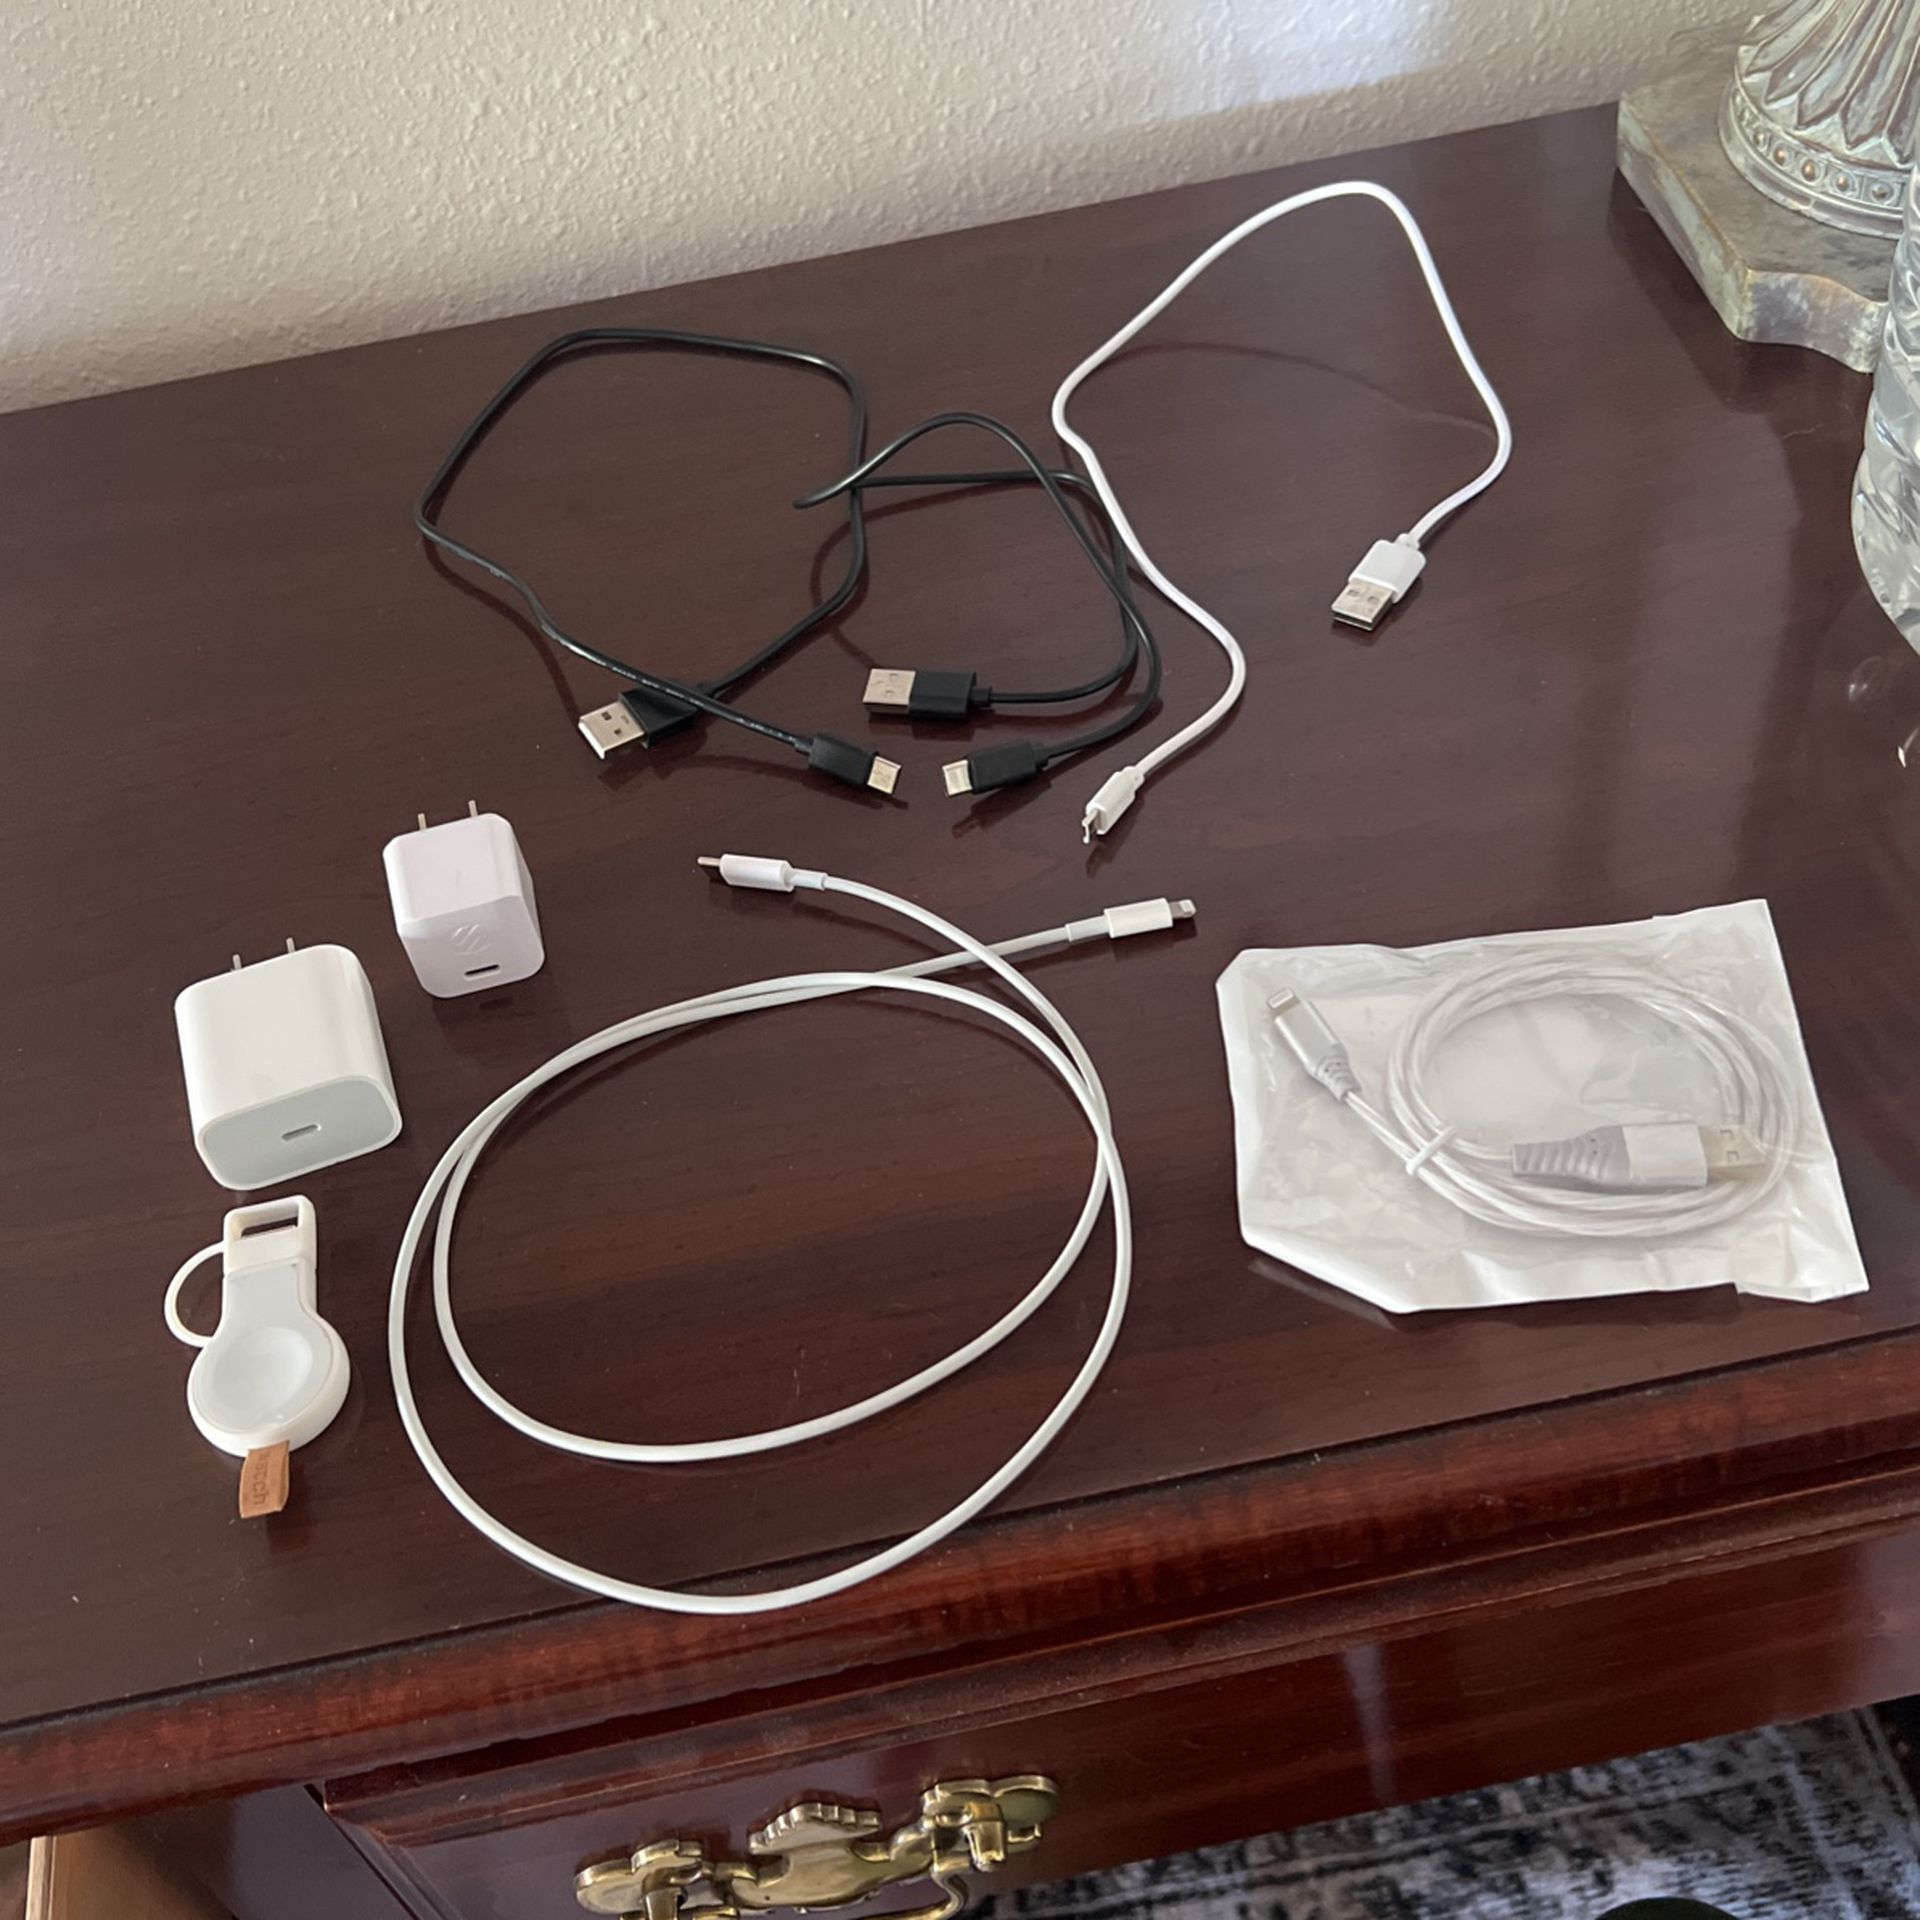 Charge Cords Apple, Mini USB, USBC Apple Watch Charger